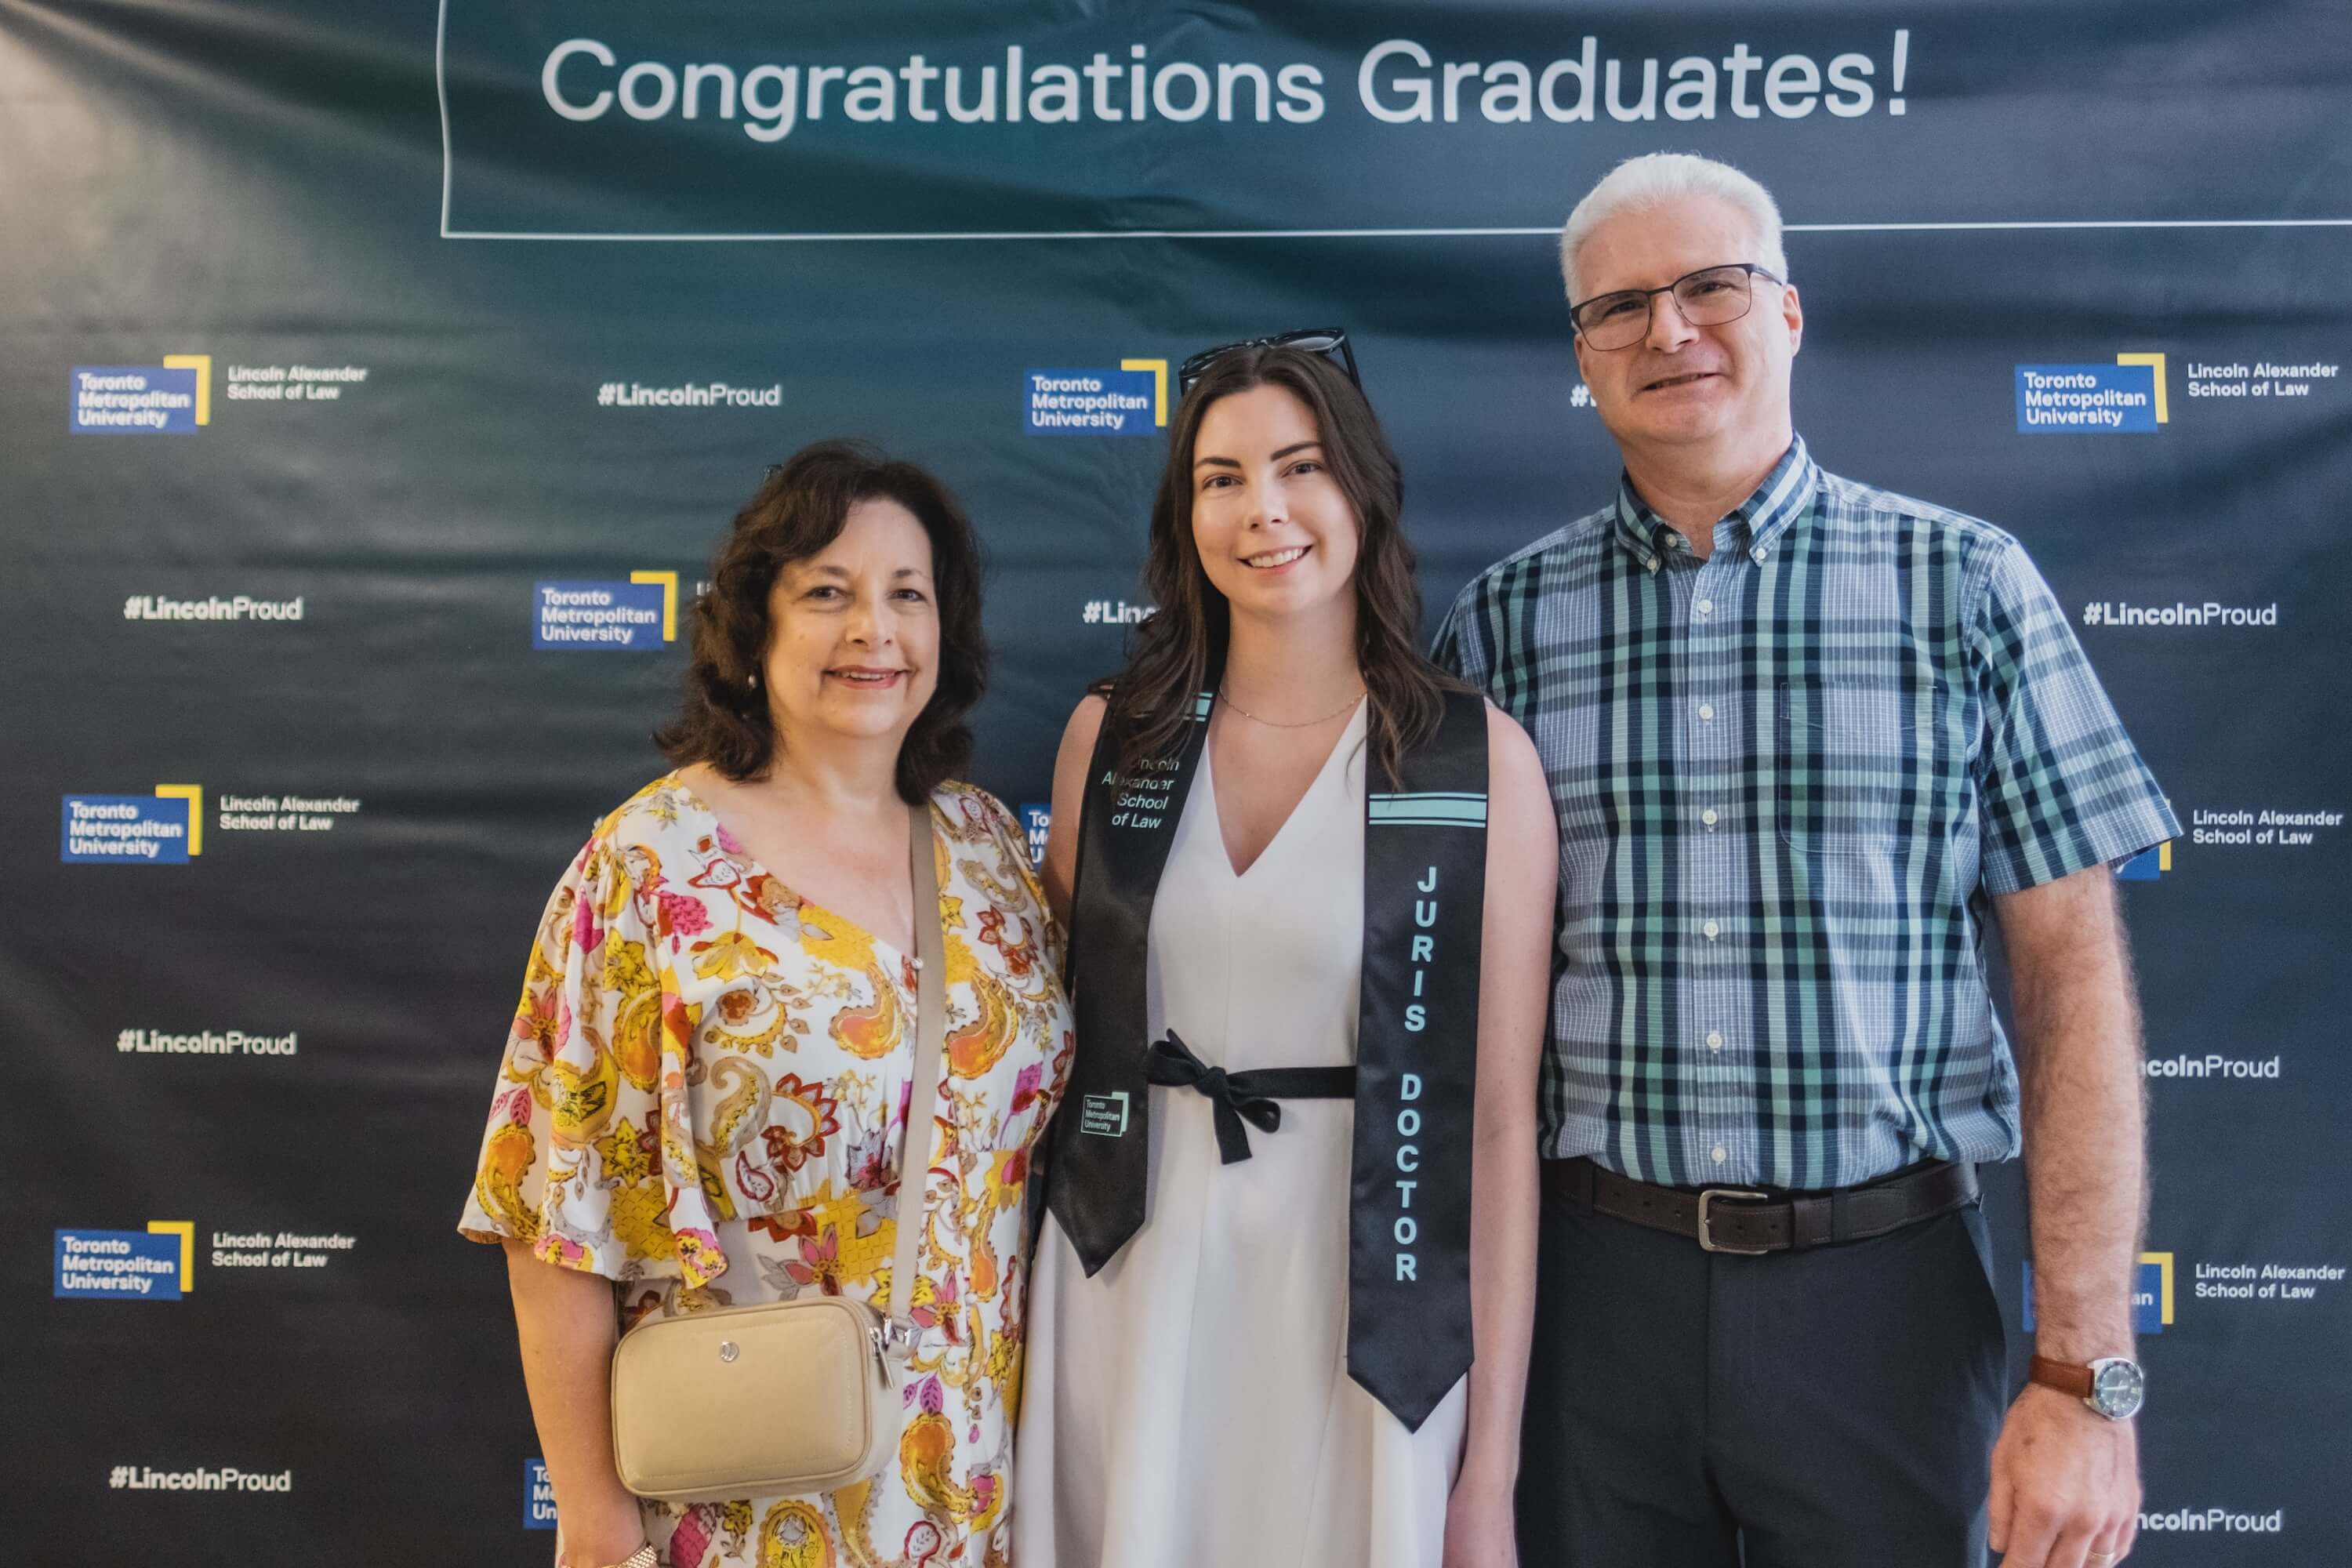 A young woman and an older man and woman pose for a photo in front of a backdrop that says "Congratulations Graduates!"